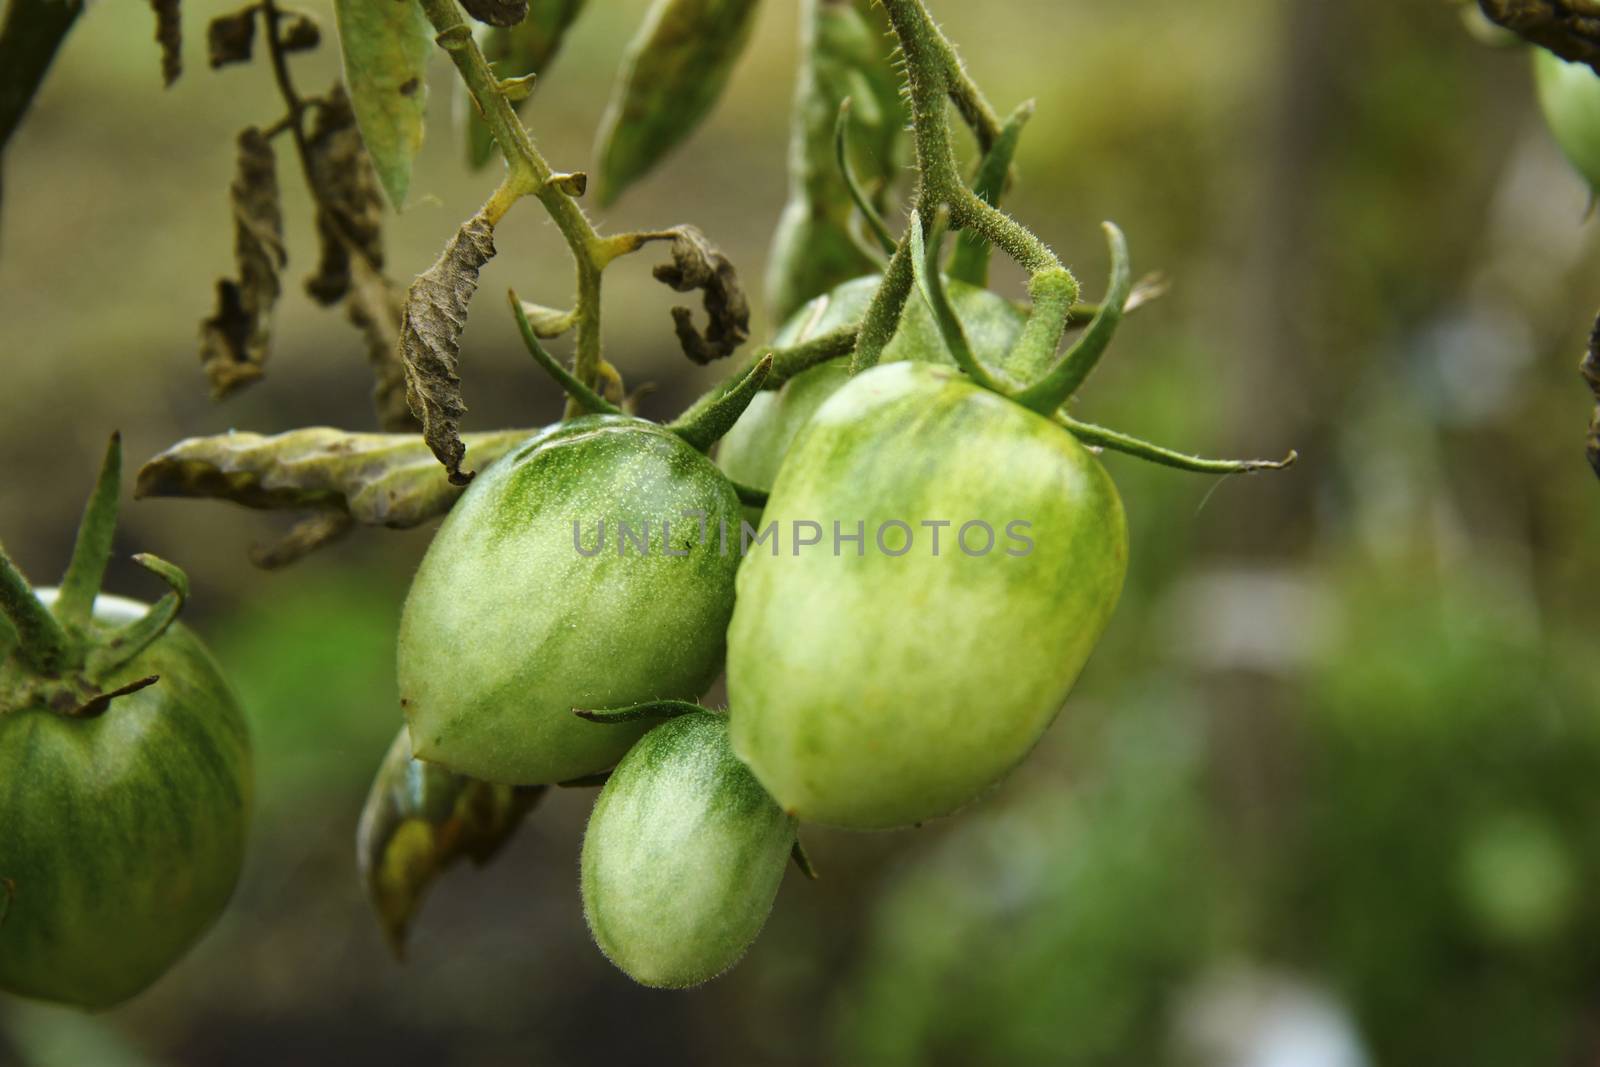 Bush Of Green Tomato In The Garden in man hands by scullery